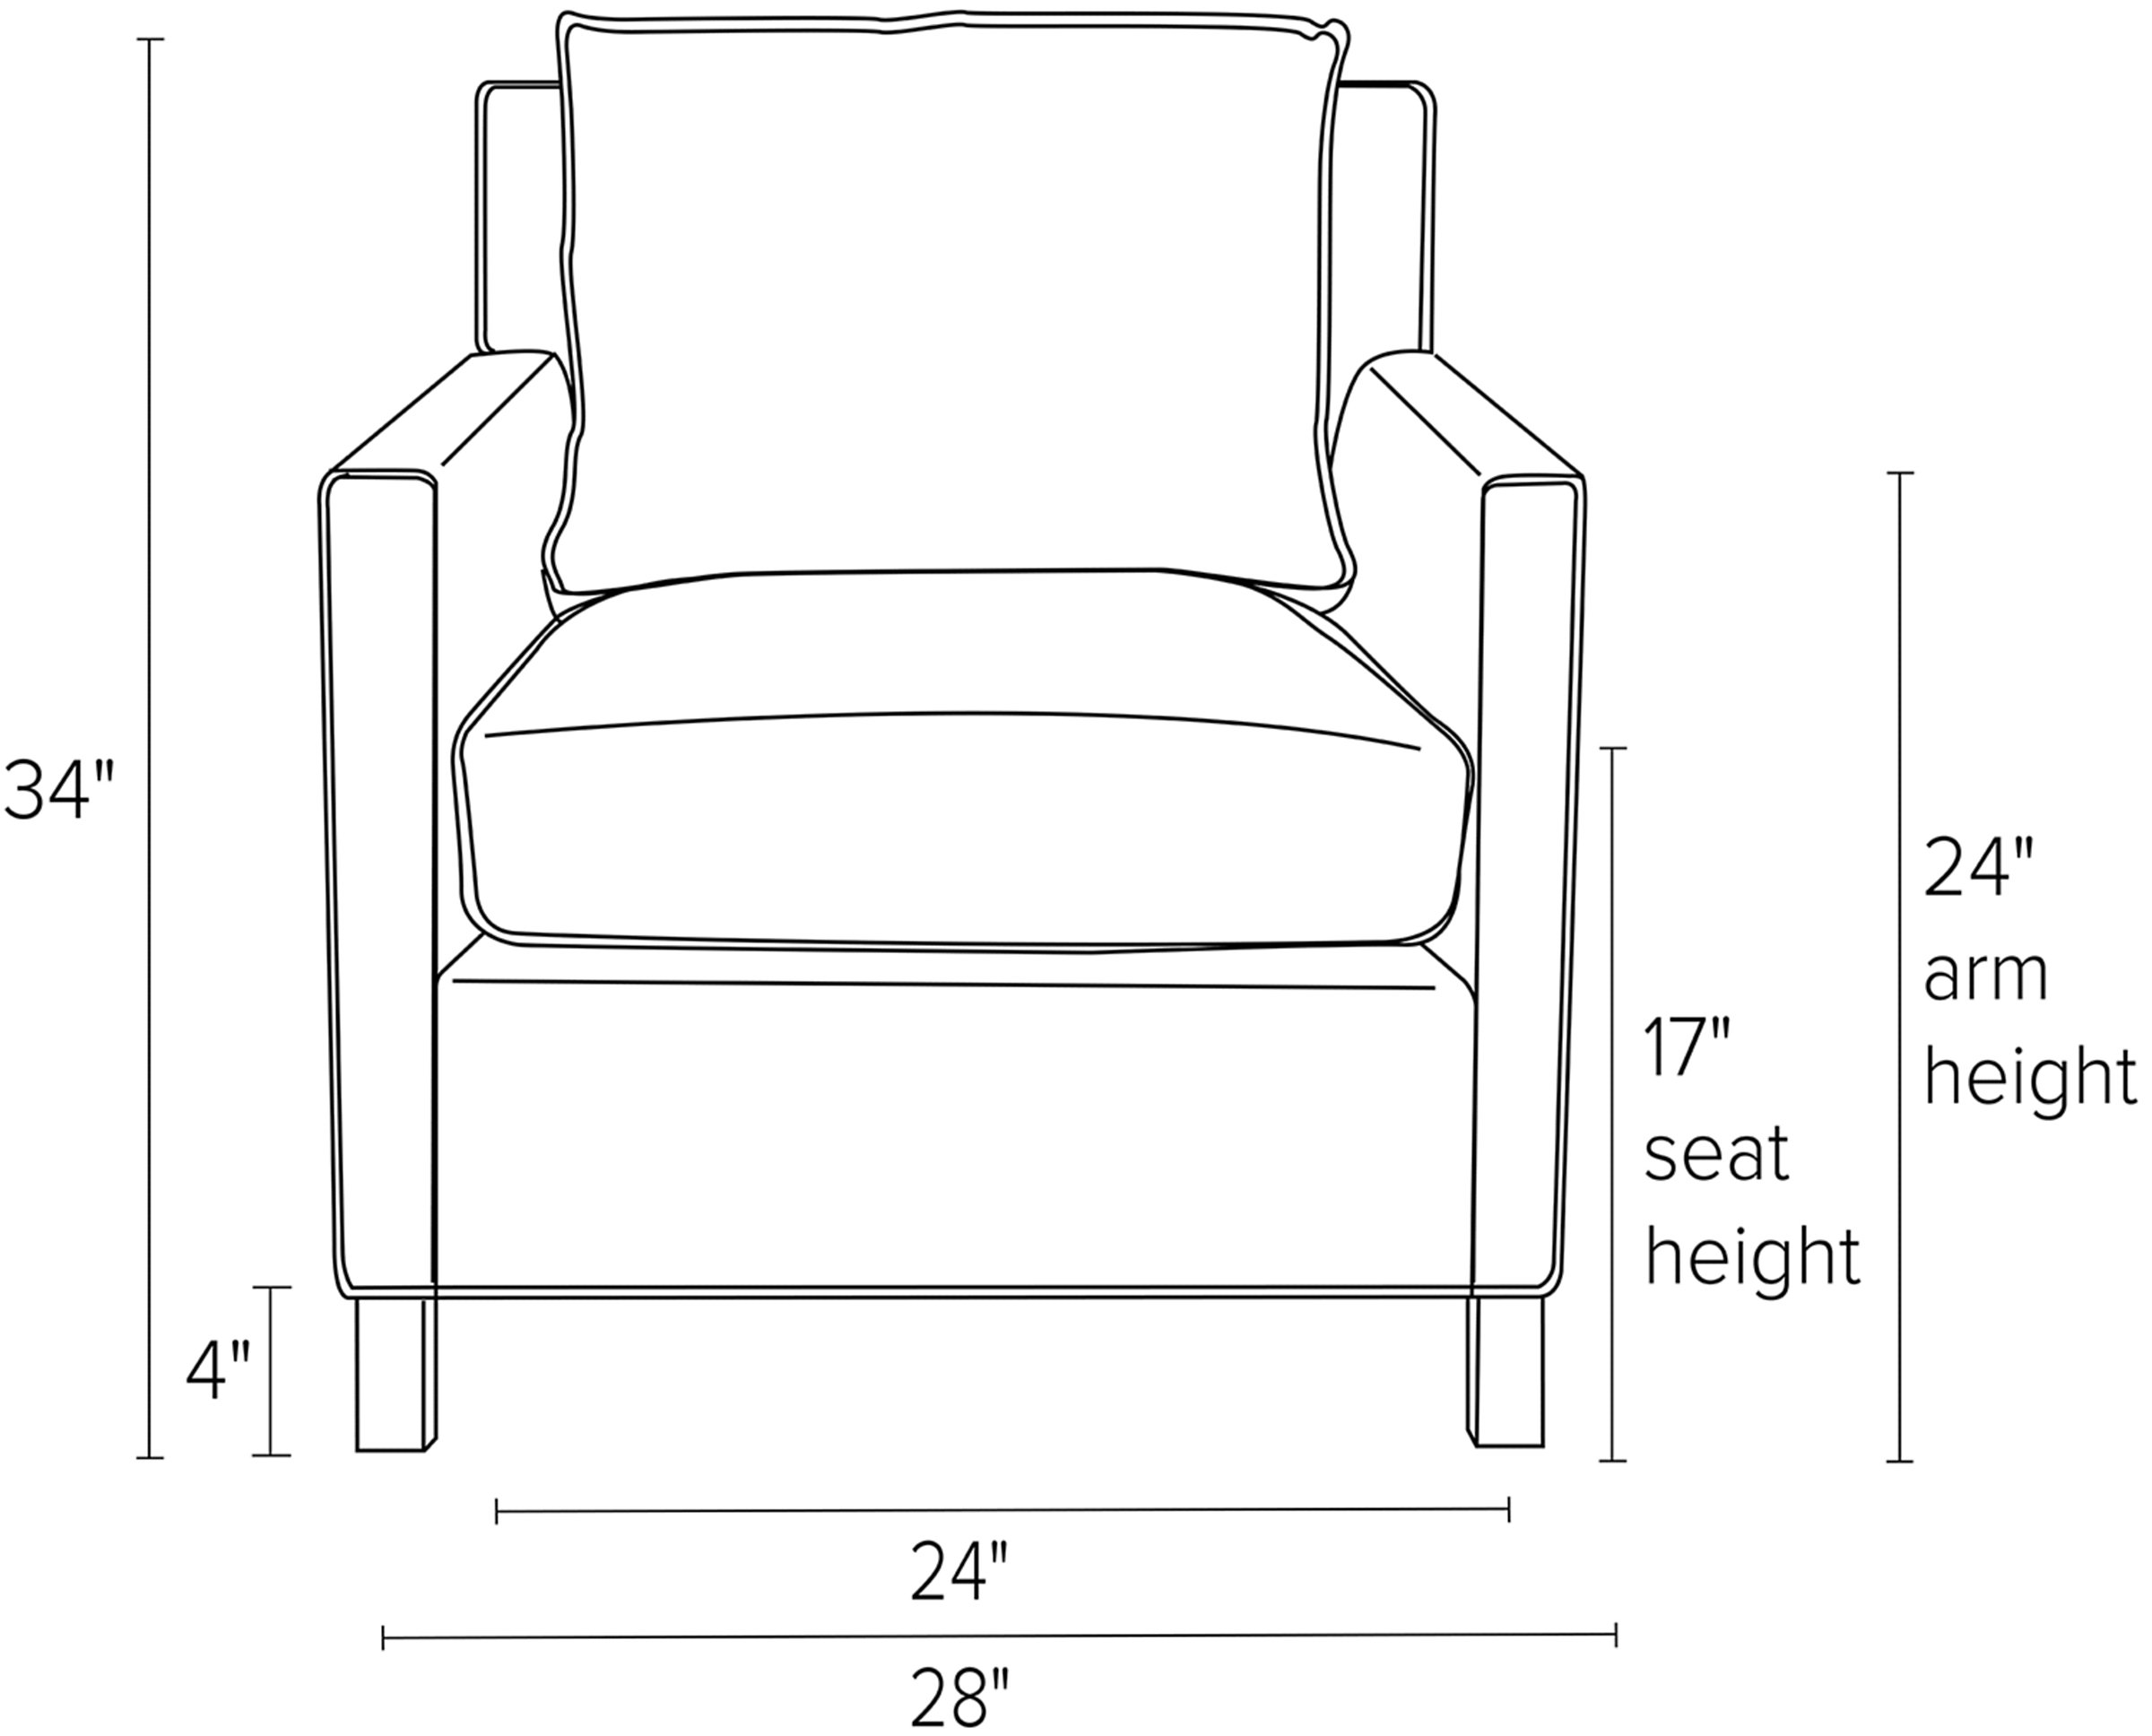 Front view dimension illustration of Bram chair.